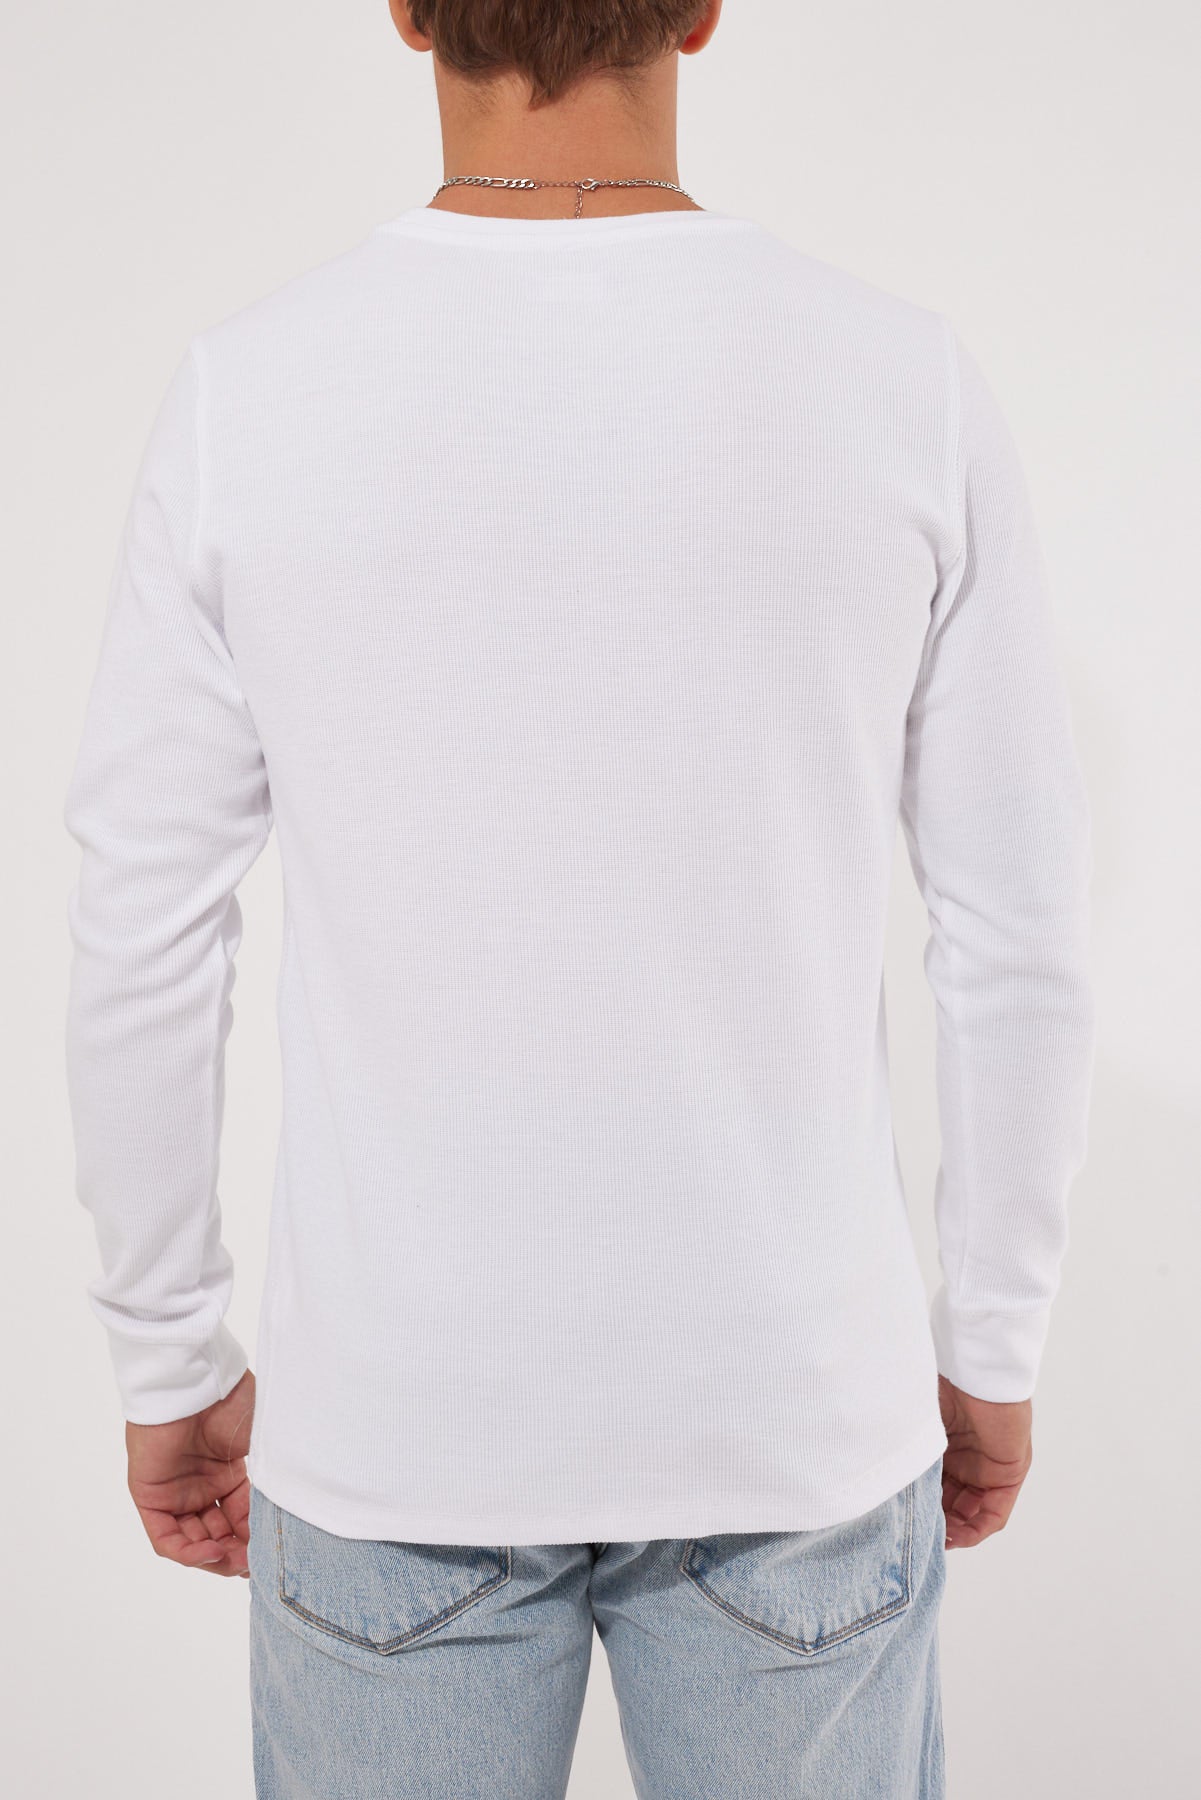 Academy Brand Workers Crew White